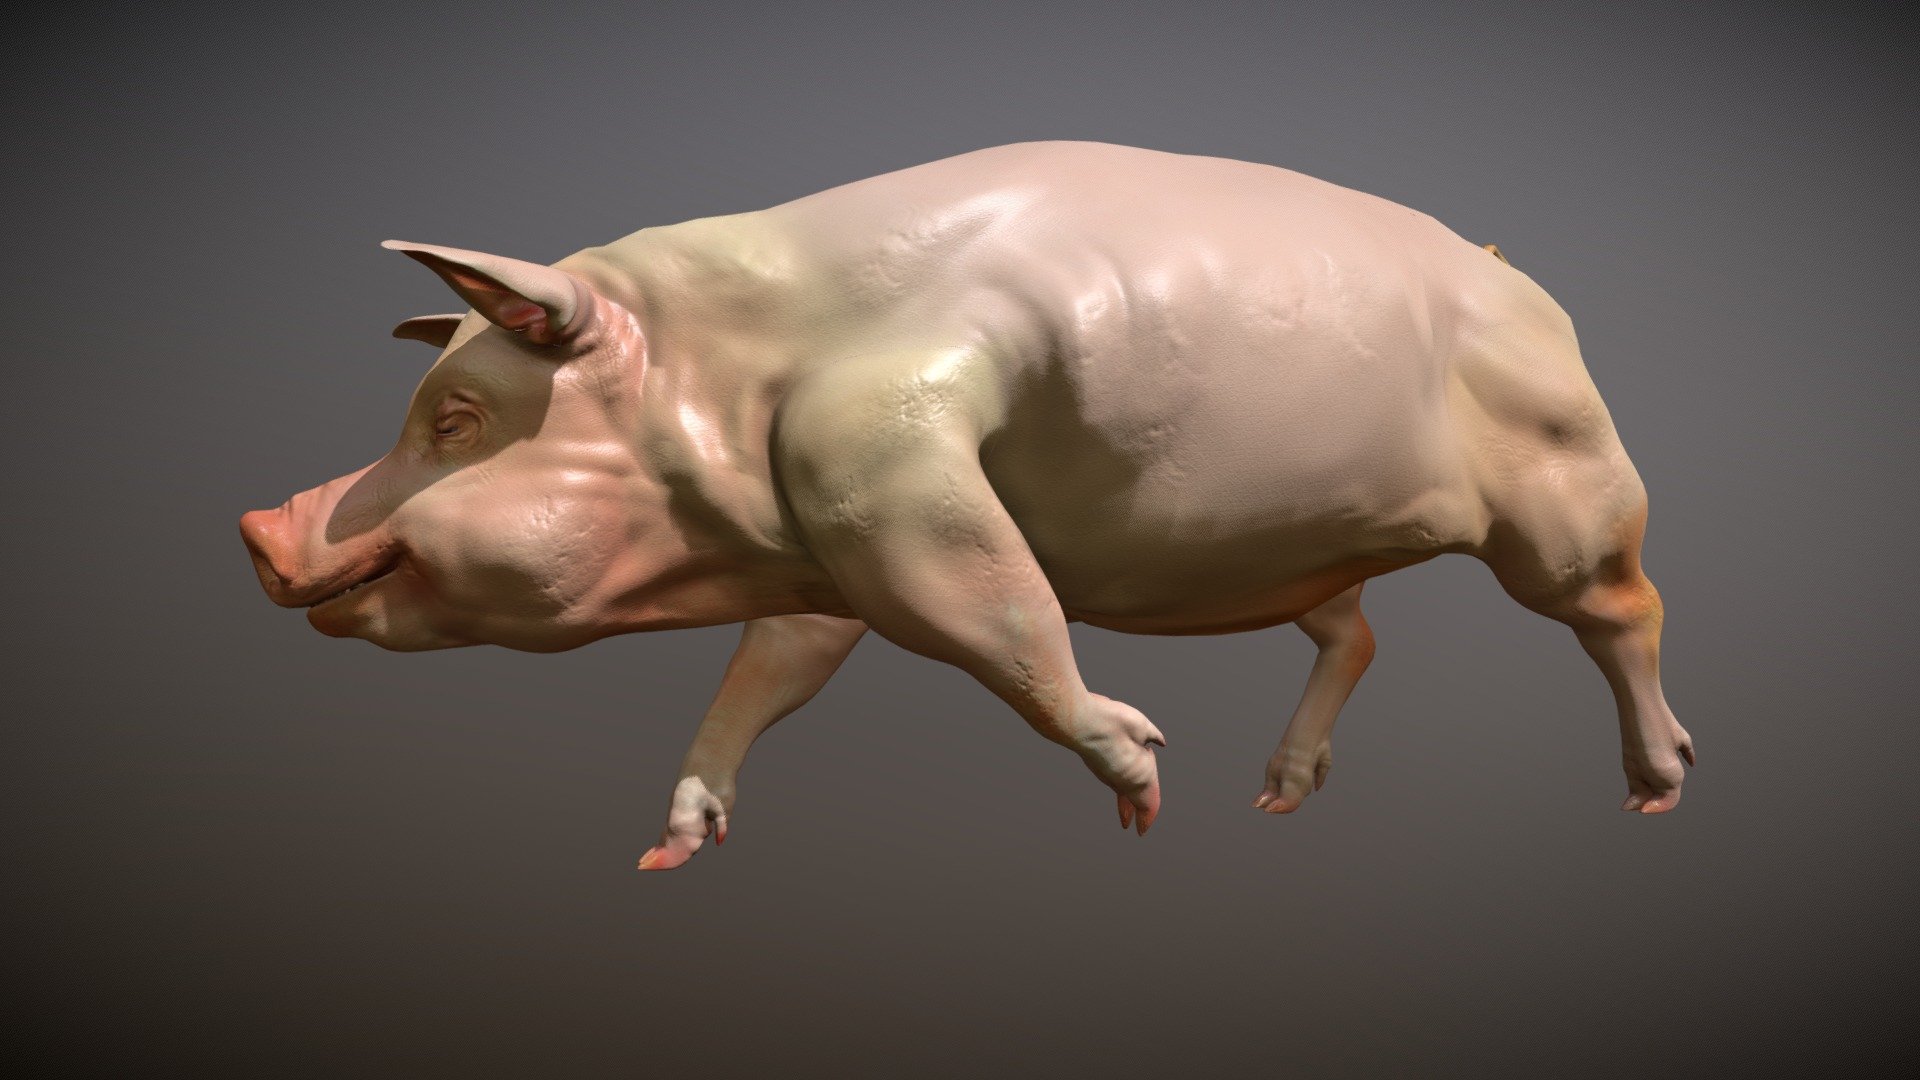 3d model of Pig rigged created in Blender 2.79. Pig model without fur, it has PBR material with high resolution textures.
Eyeballs, teeth, tongue and gum are included and modeled separately.

Model is rigged and animated.

This asset comes fully rigged and animated.
One animation set have been included in frames 1-30 and is defined below:
1) Pig_Walk (1-30)

Verts 12437
Faces 12036
Tris 24072 - Pig - Buy Royalty Free 3D model by Crisdu 3d model